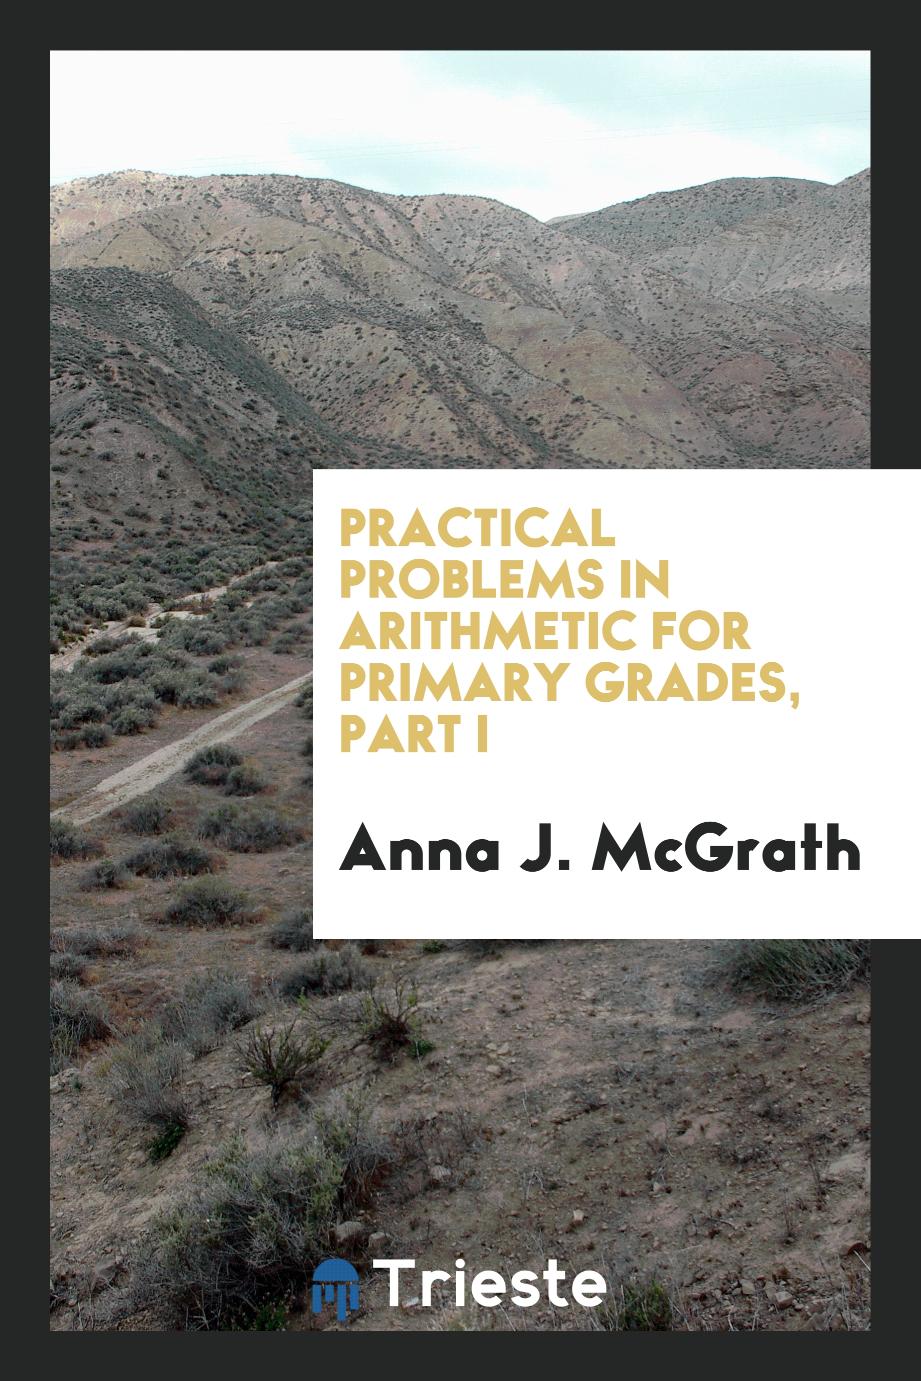 Practical Problems in Arithmetic for Primary Grades, Part I